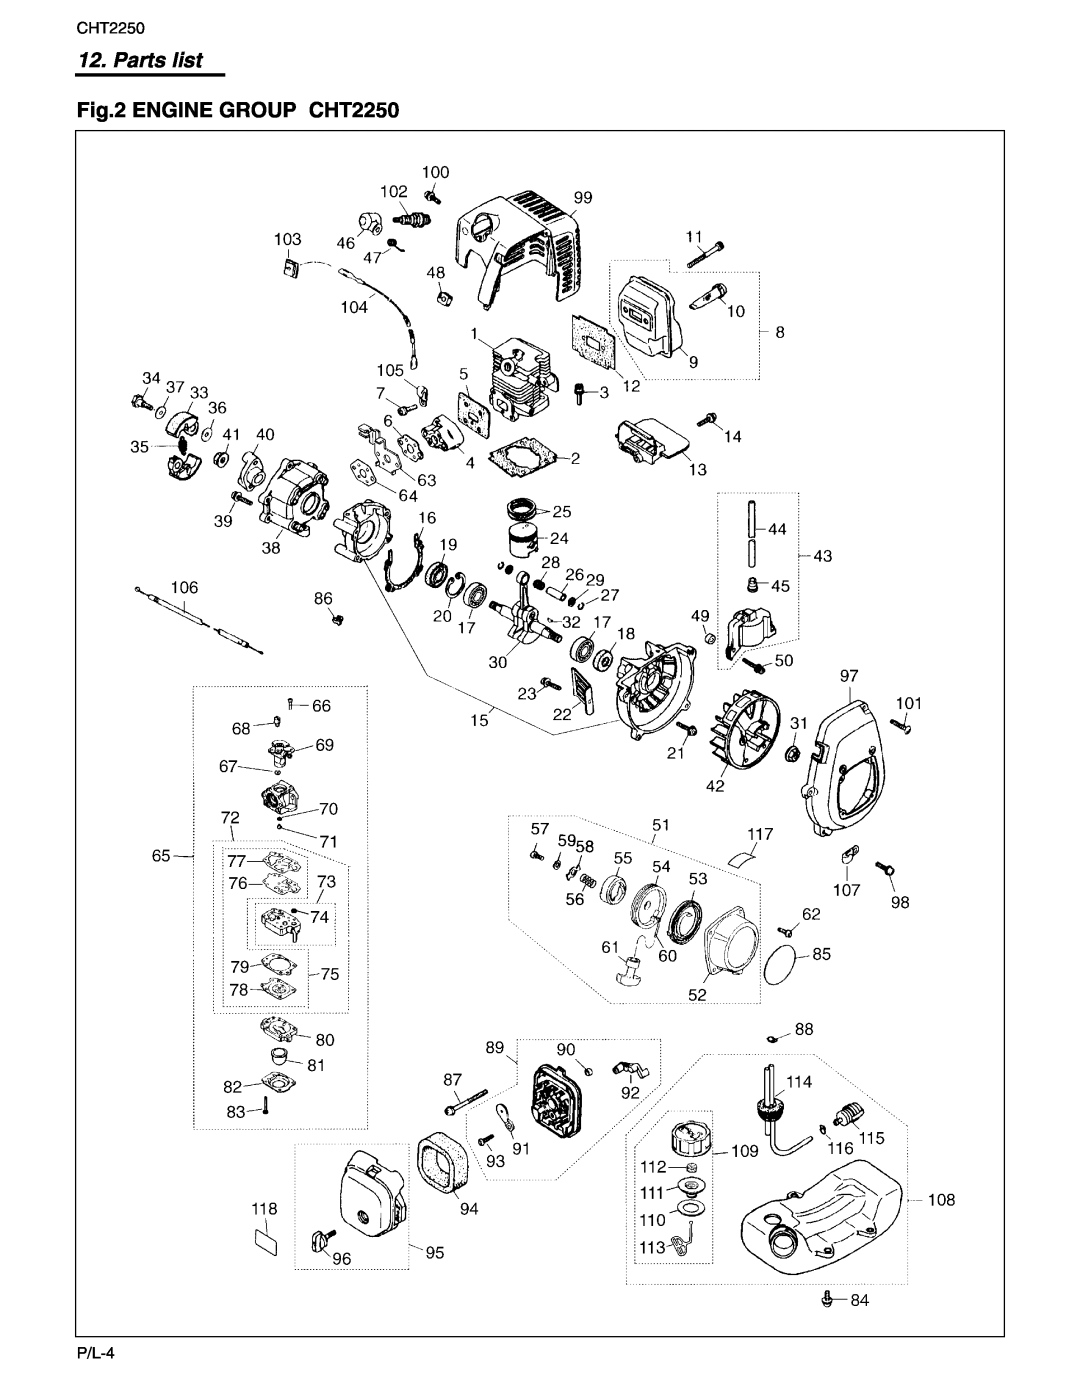 RedMax manual ENGINE GROUP CHT2250, Parts list 